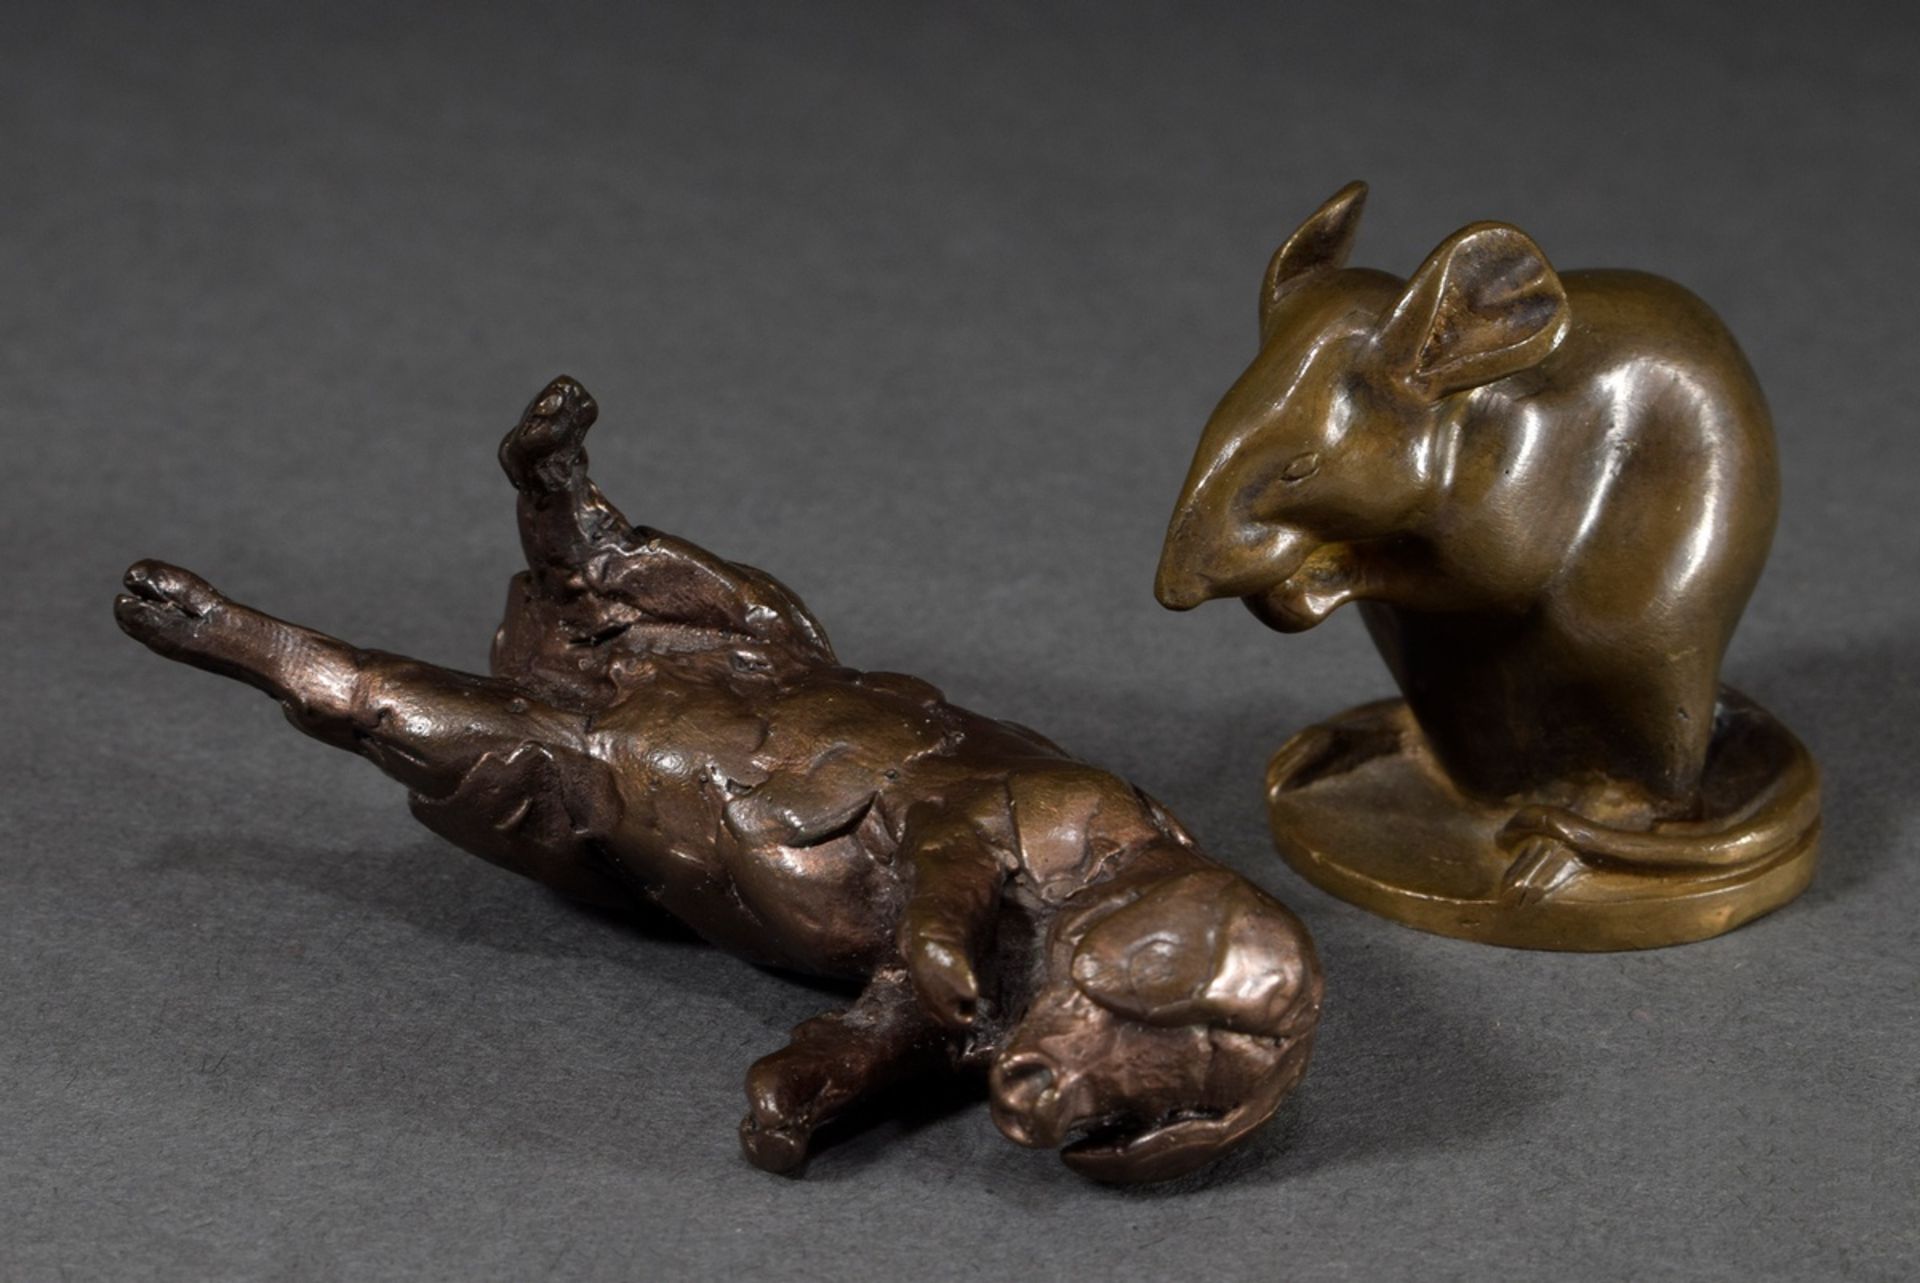 2 Various bronze miniatures "Wallowing pig" and "Crouching mouse", 1x on the bottom inscribed warri